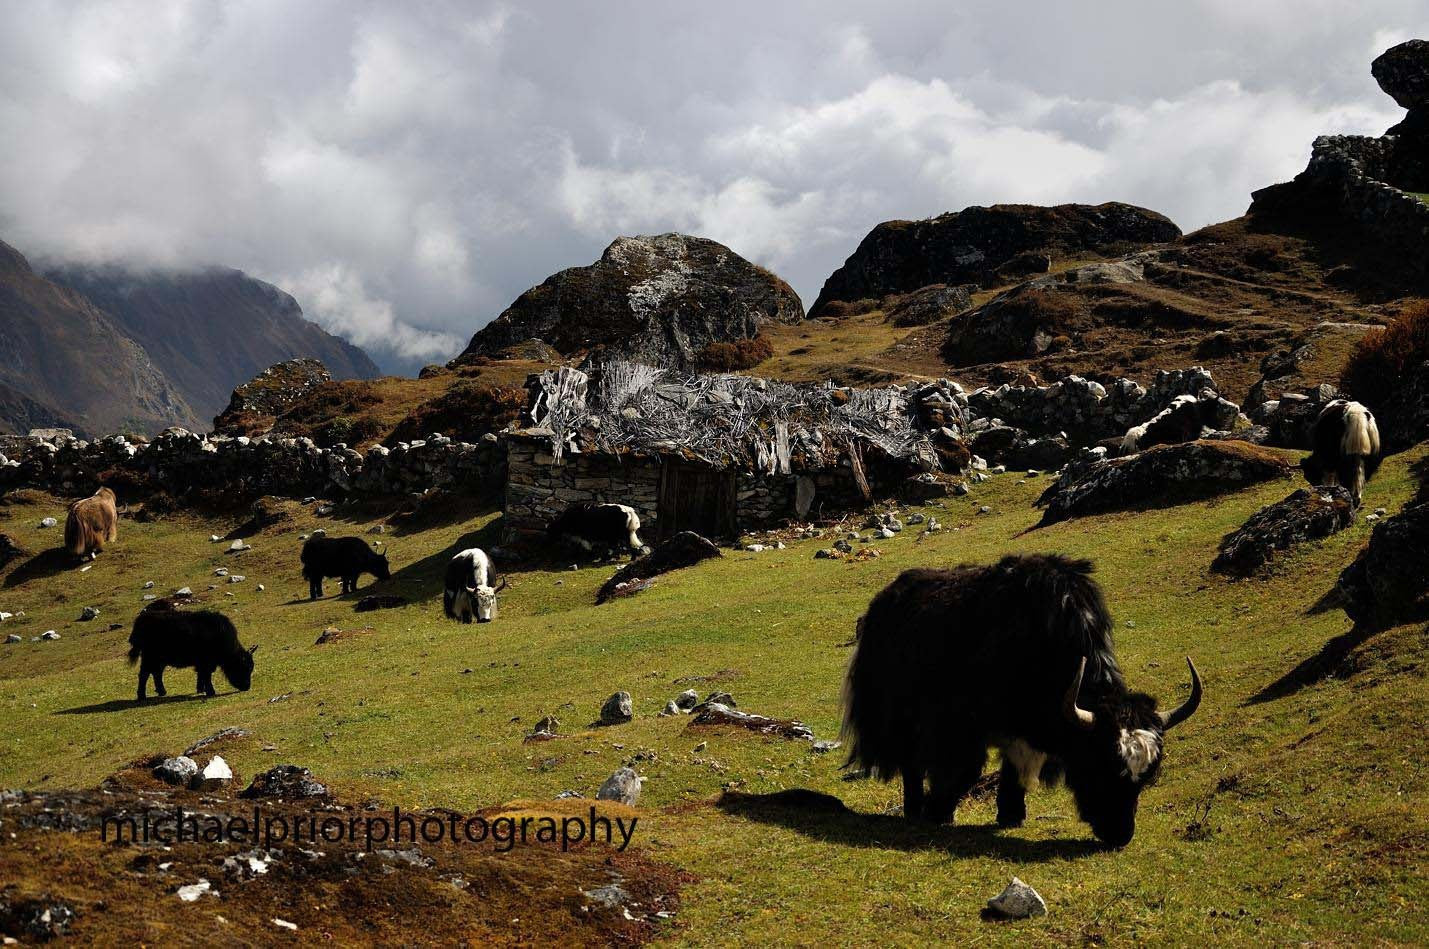 Field Of Yaks - The Himalayas - Michael Prior Photography 